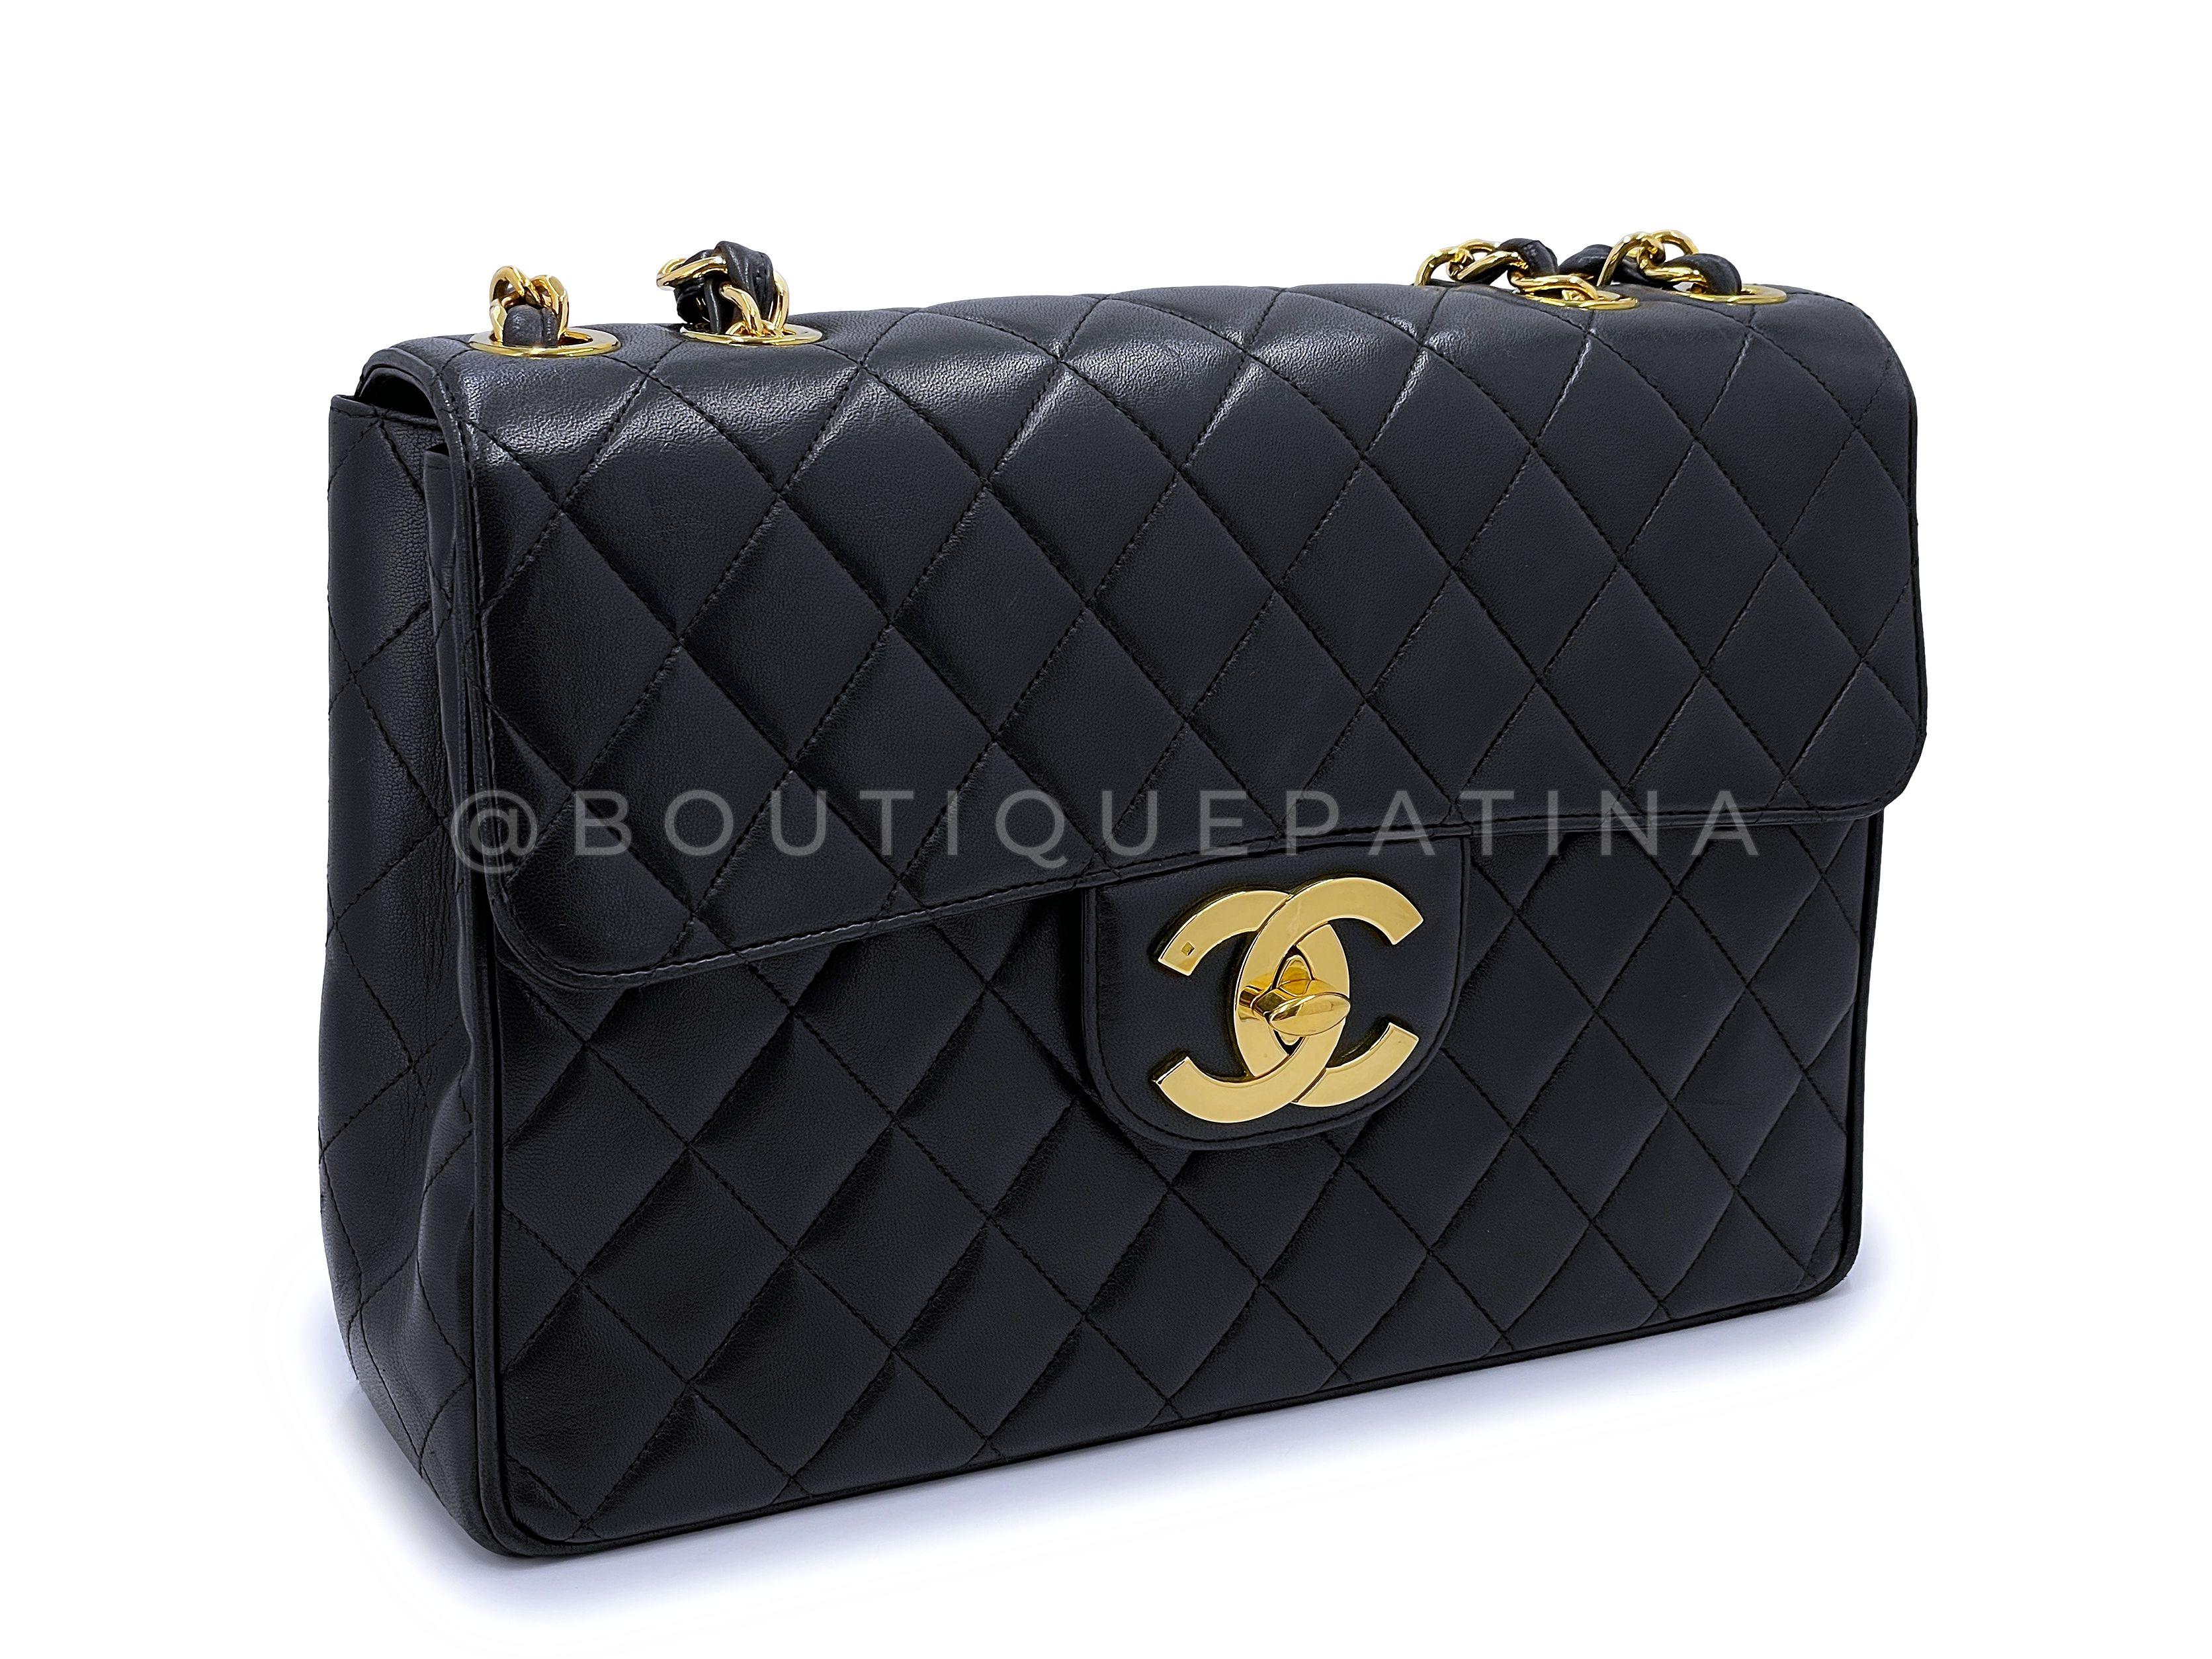 Chanel 1994 Vintage Black Jumbo Classic Flap Bag 24k GHW Lambskin 67053 In Excellent Condition For Sale In Costa Mesa, CA